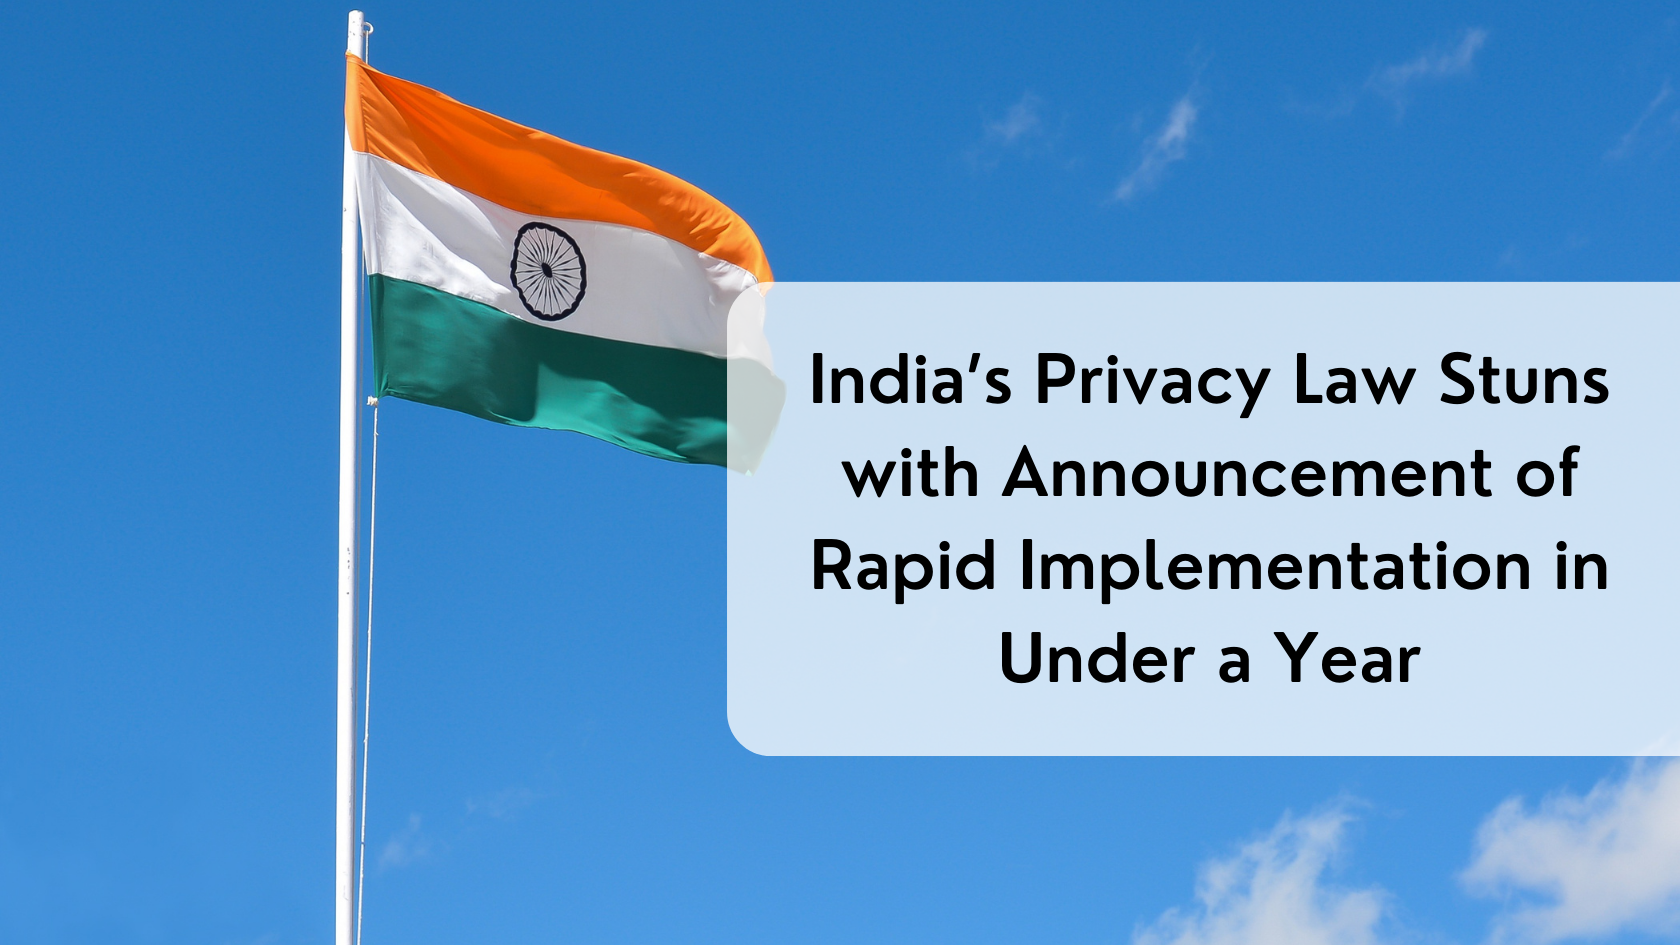 India’s Privacy Law Stuns with Announcement of Rapid Implementation in Under a Year